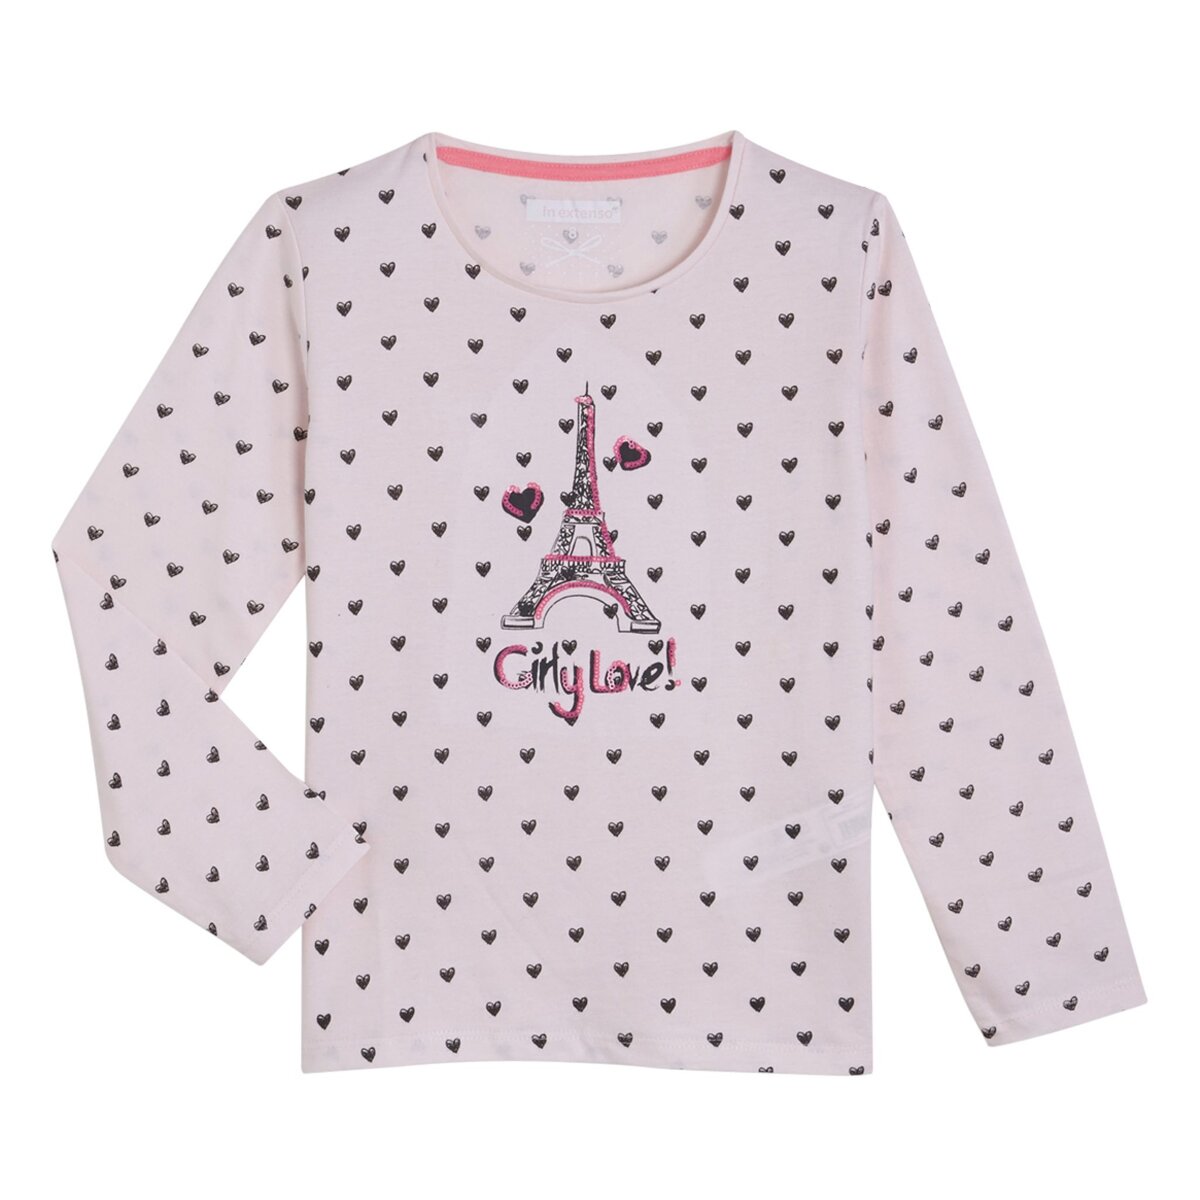 IN EXTENSO Tee-shirt manches longues Paris fille